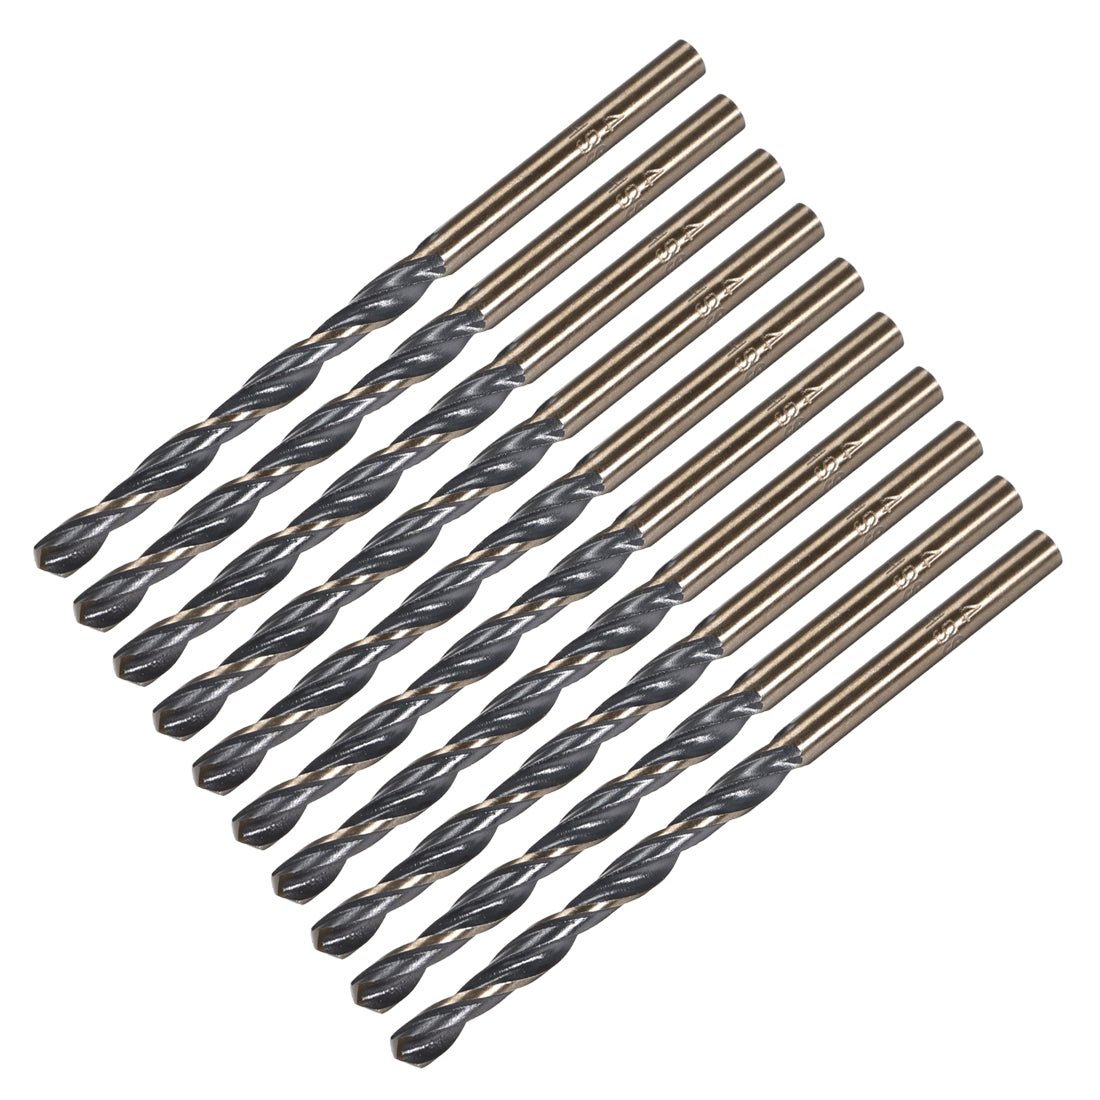 uxcell Uxcell Straight Shank Twist Drill Bits 4mm HSS 4341 with 4mm Shank 10 Pcs